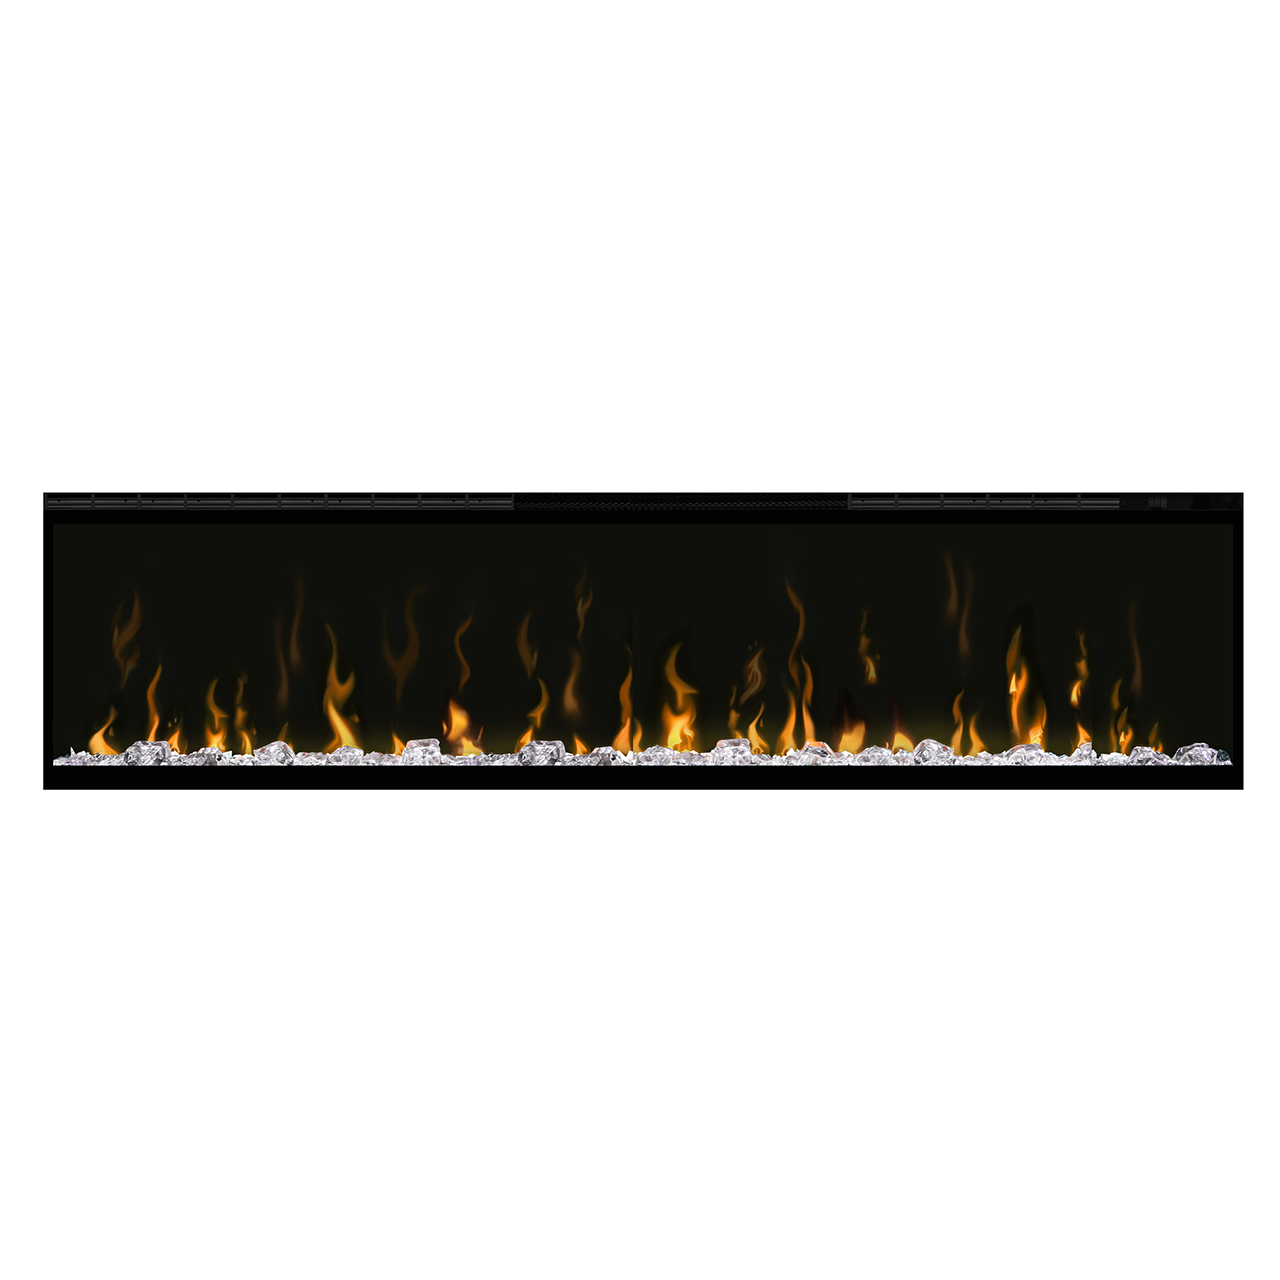 ignitexl 60 inch linear electric fireplace product image